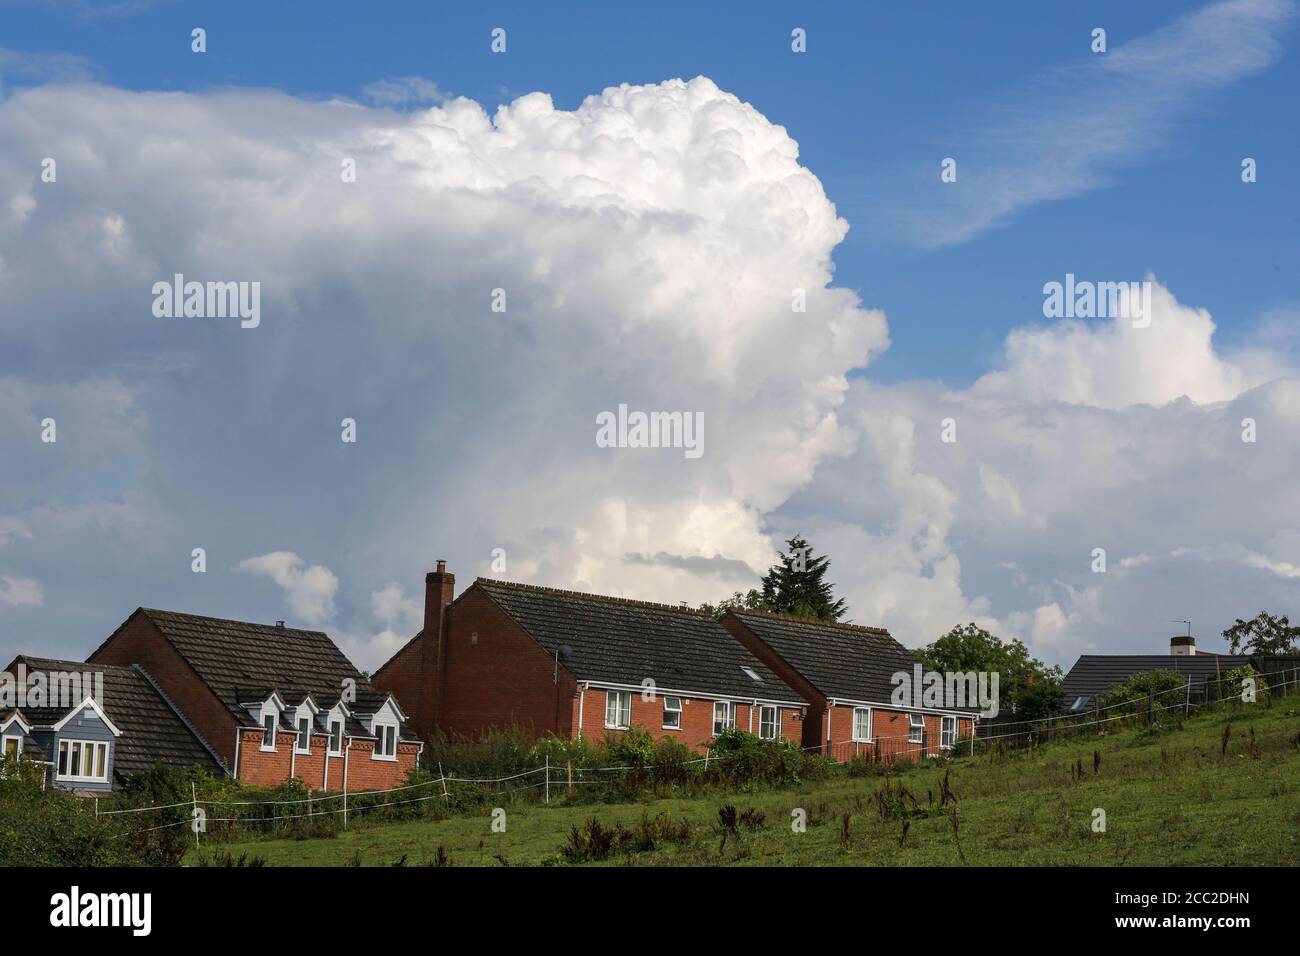 Romsley, Worcestershire, August 17th 2020. Dramatic clouds loomed over houses in Romsley, Worcestershire on Monday afternoon as thunder and lightning continued to form during the hot weather. Torrential rain has hit the region but is expected to calm down in the week ahead. Credit: Sam Holiday/Alamy Live News Stock Photo